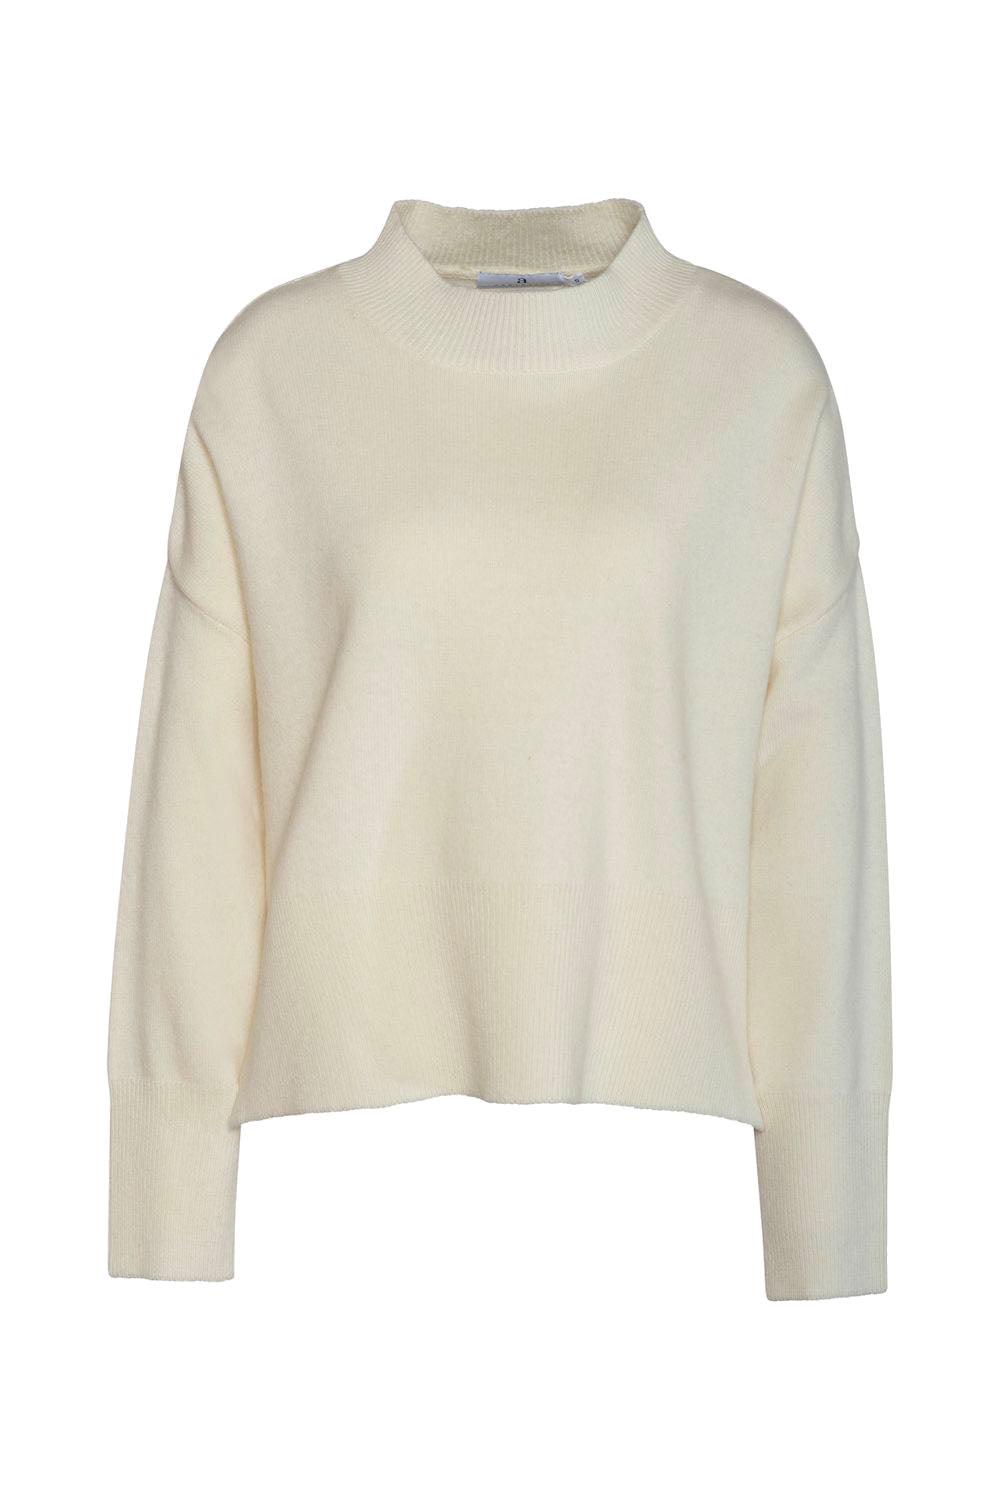 Mandy Sweater Offwhite